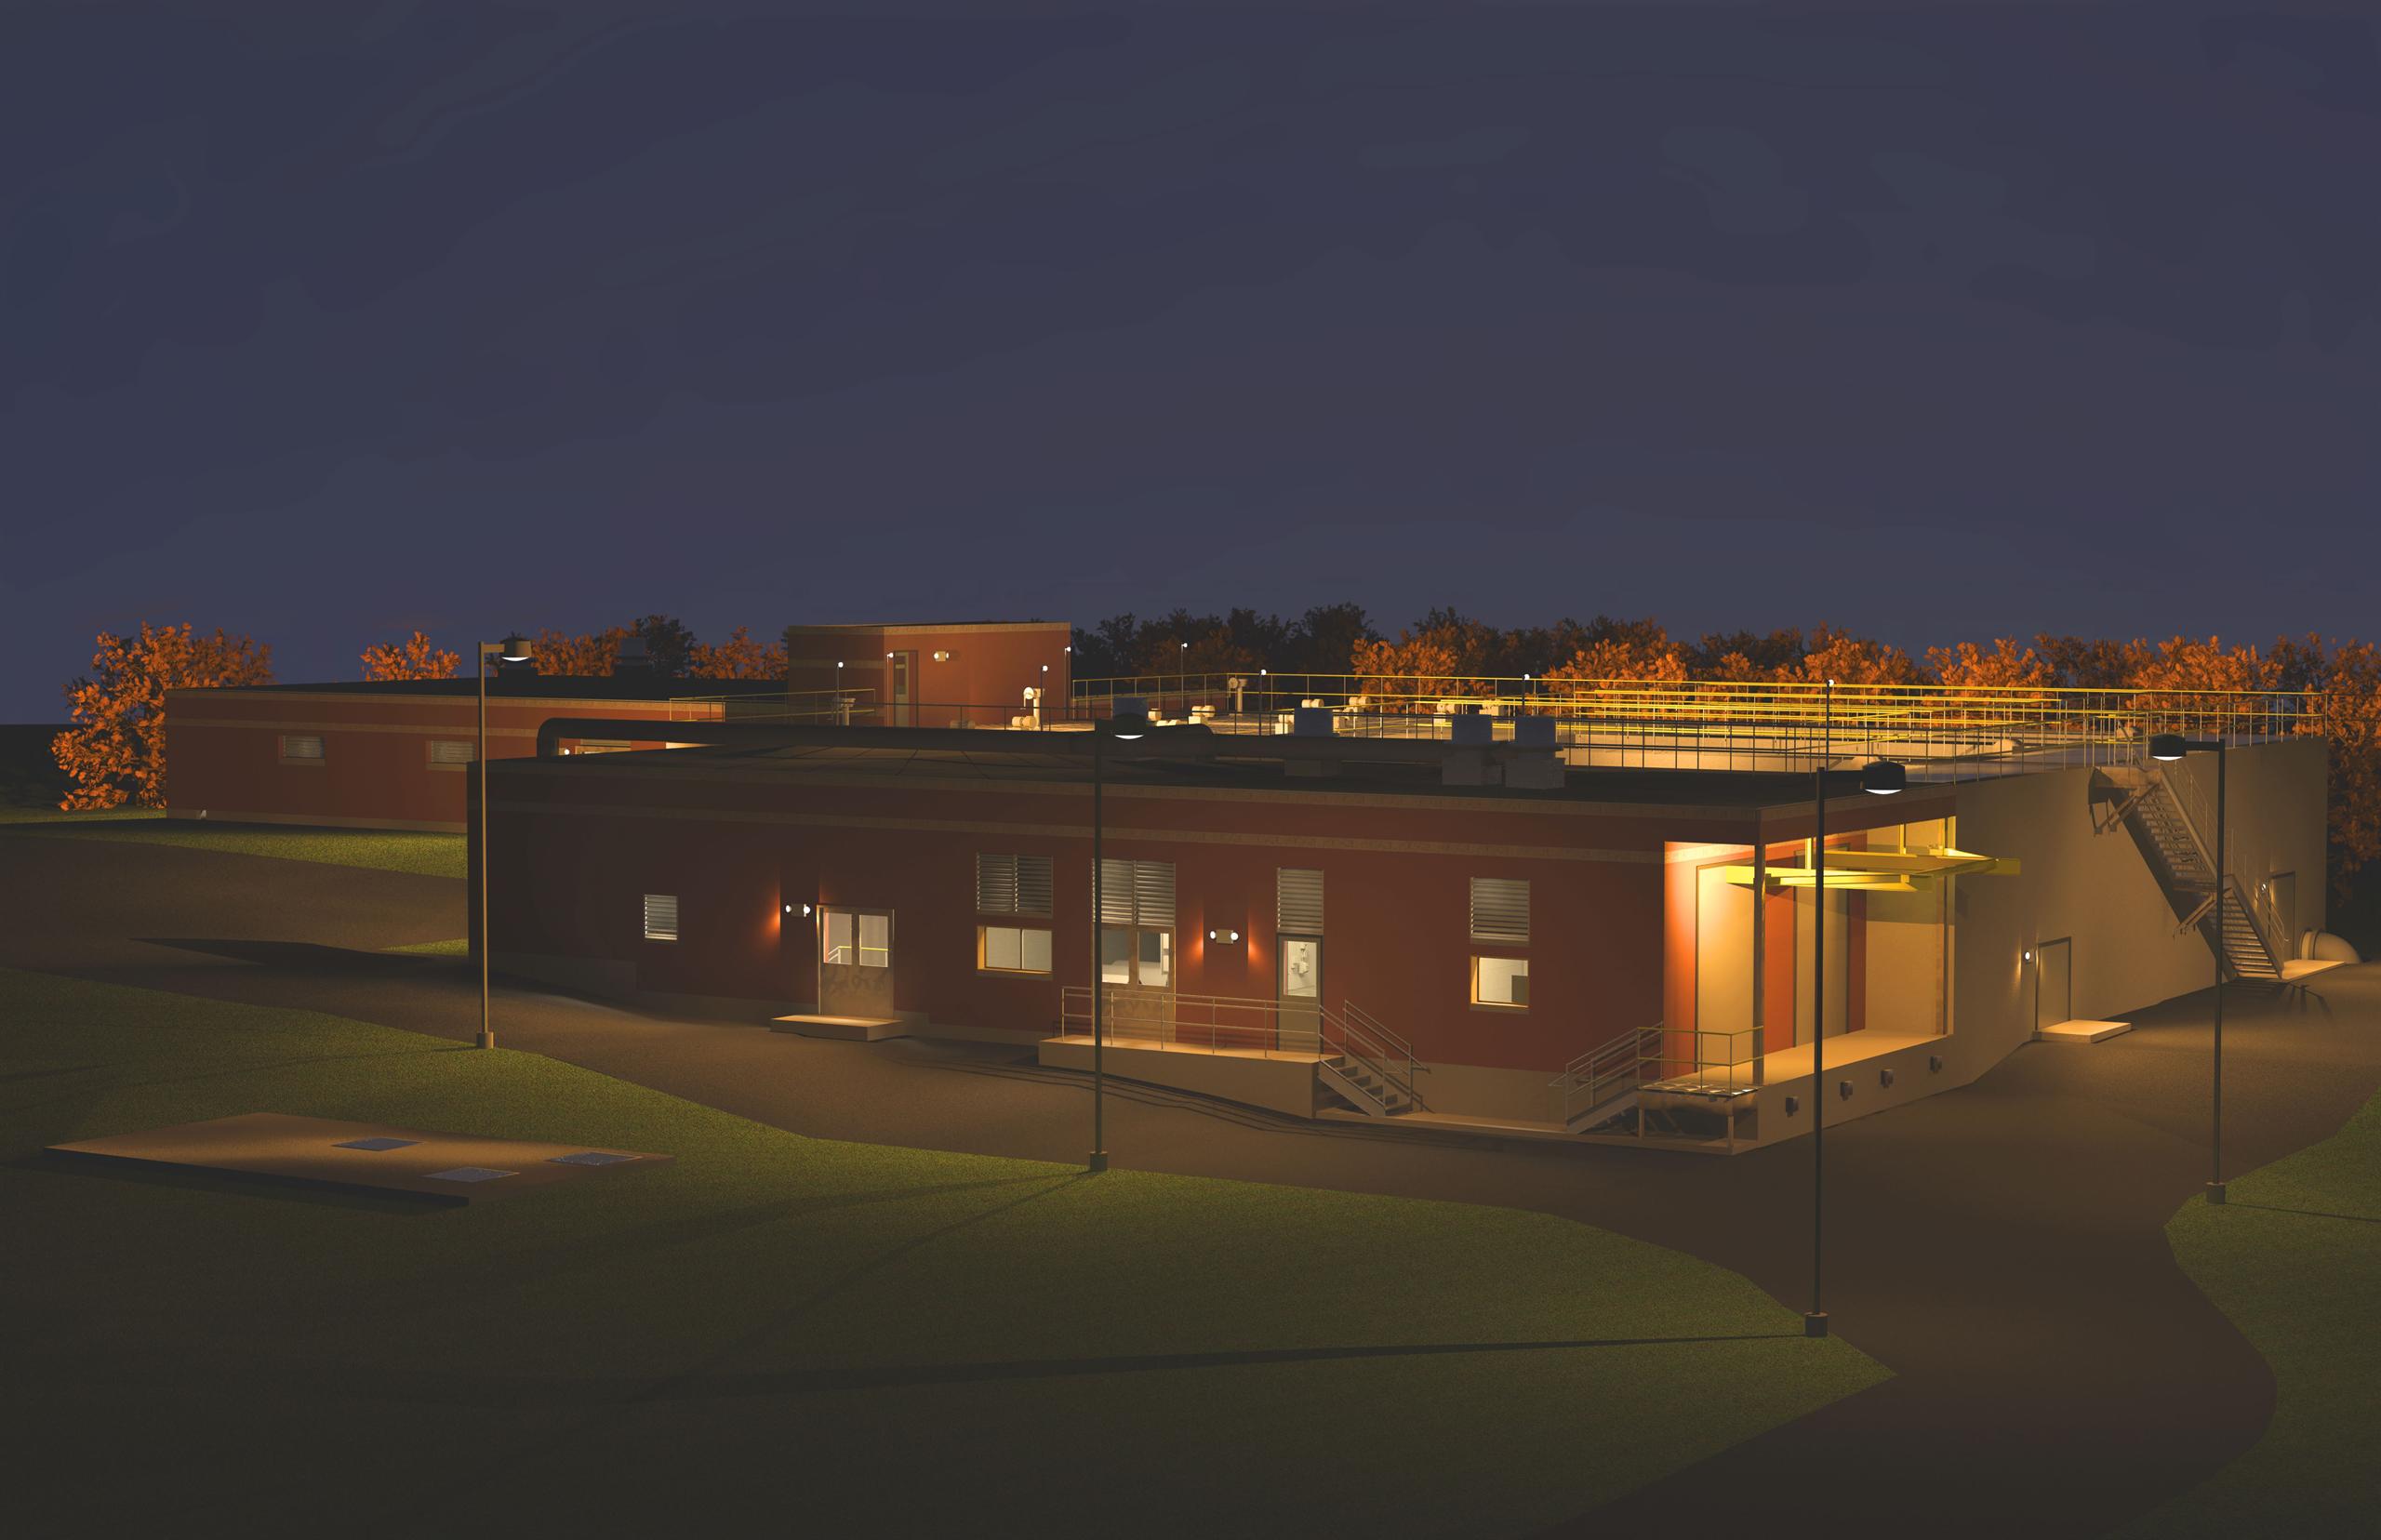 Visualisation of water treatment plant at night